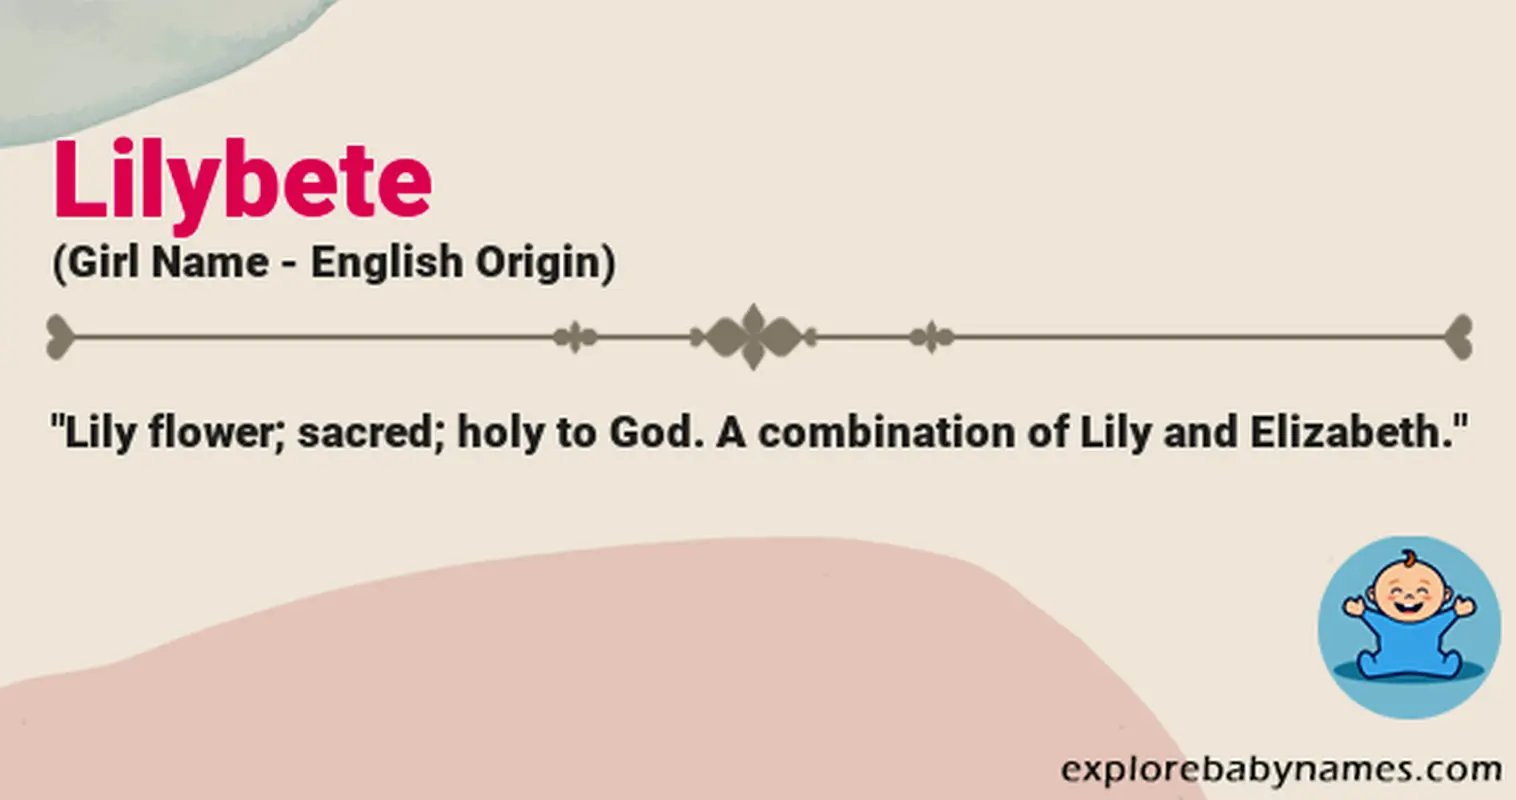 Meaning of Lilybete